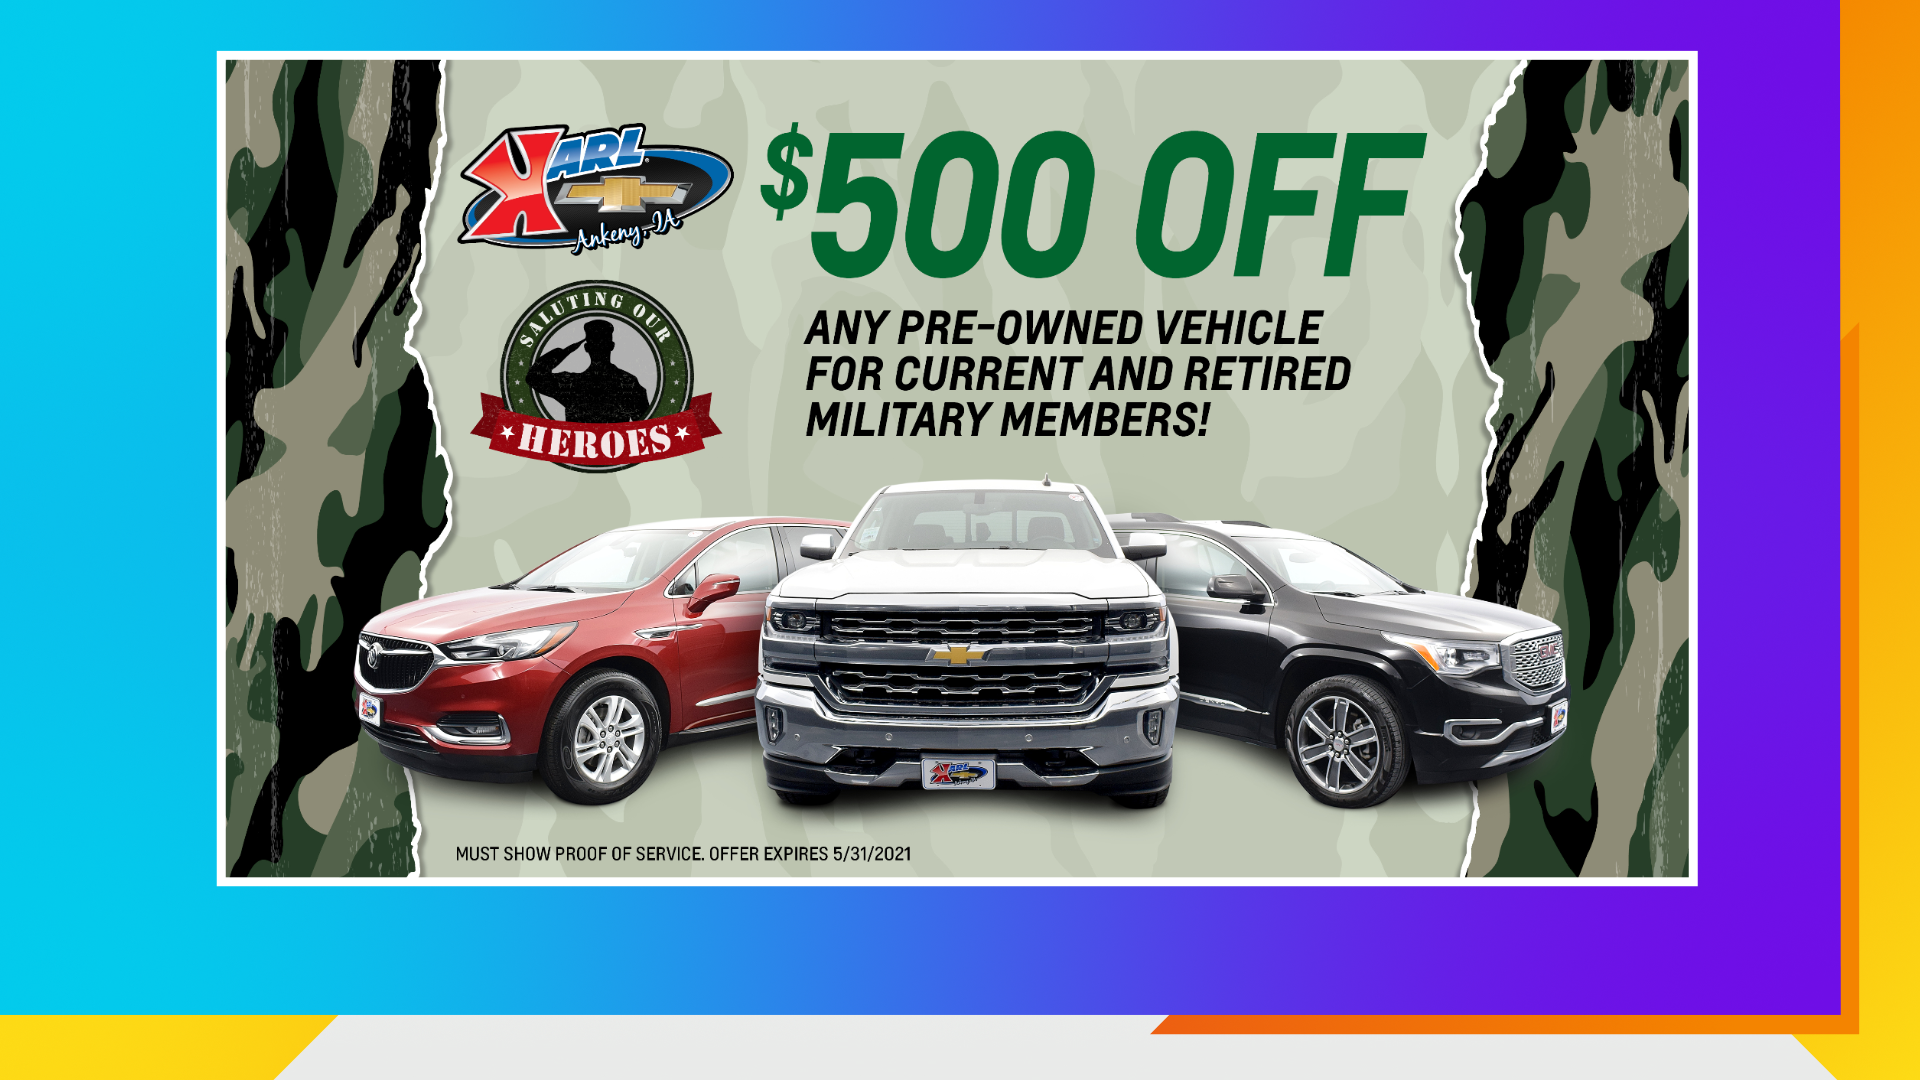 Bret Moyer from Karl Chevrolet talks about the final days of the Sell Us Your Vehicle Event going on right now! Also, $500 Military pre-owned discount | PAID CONTENT